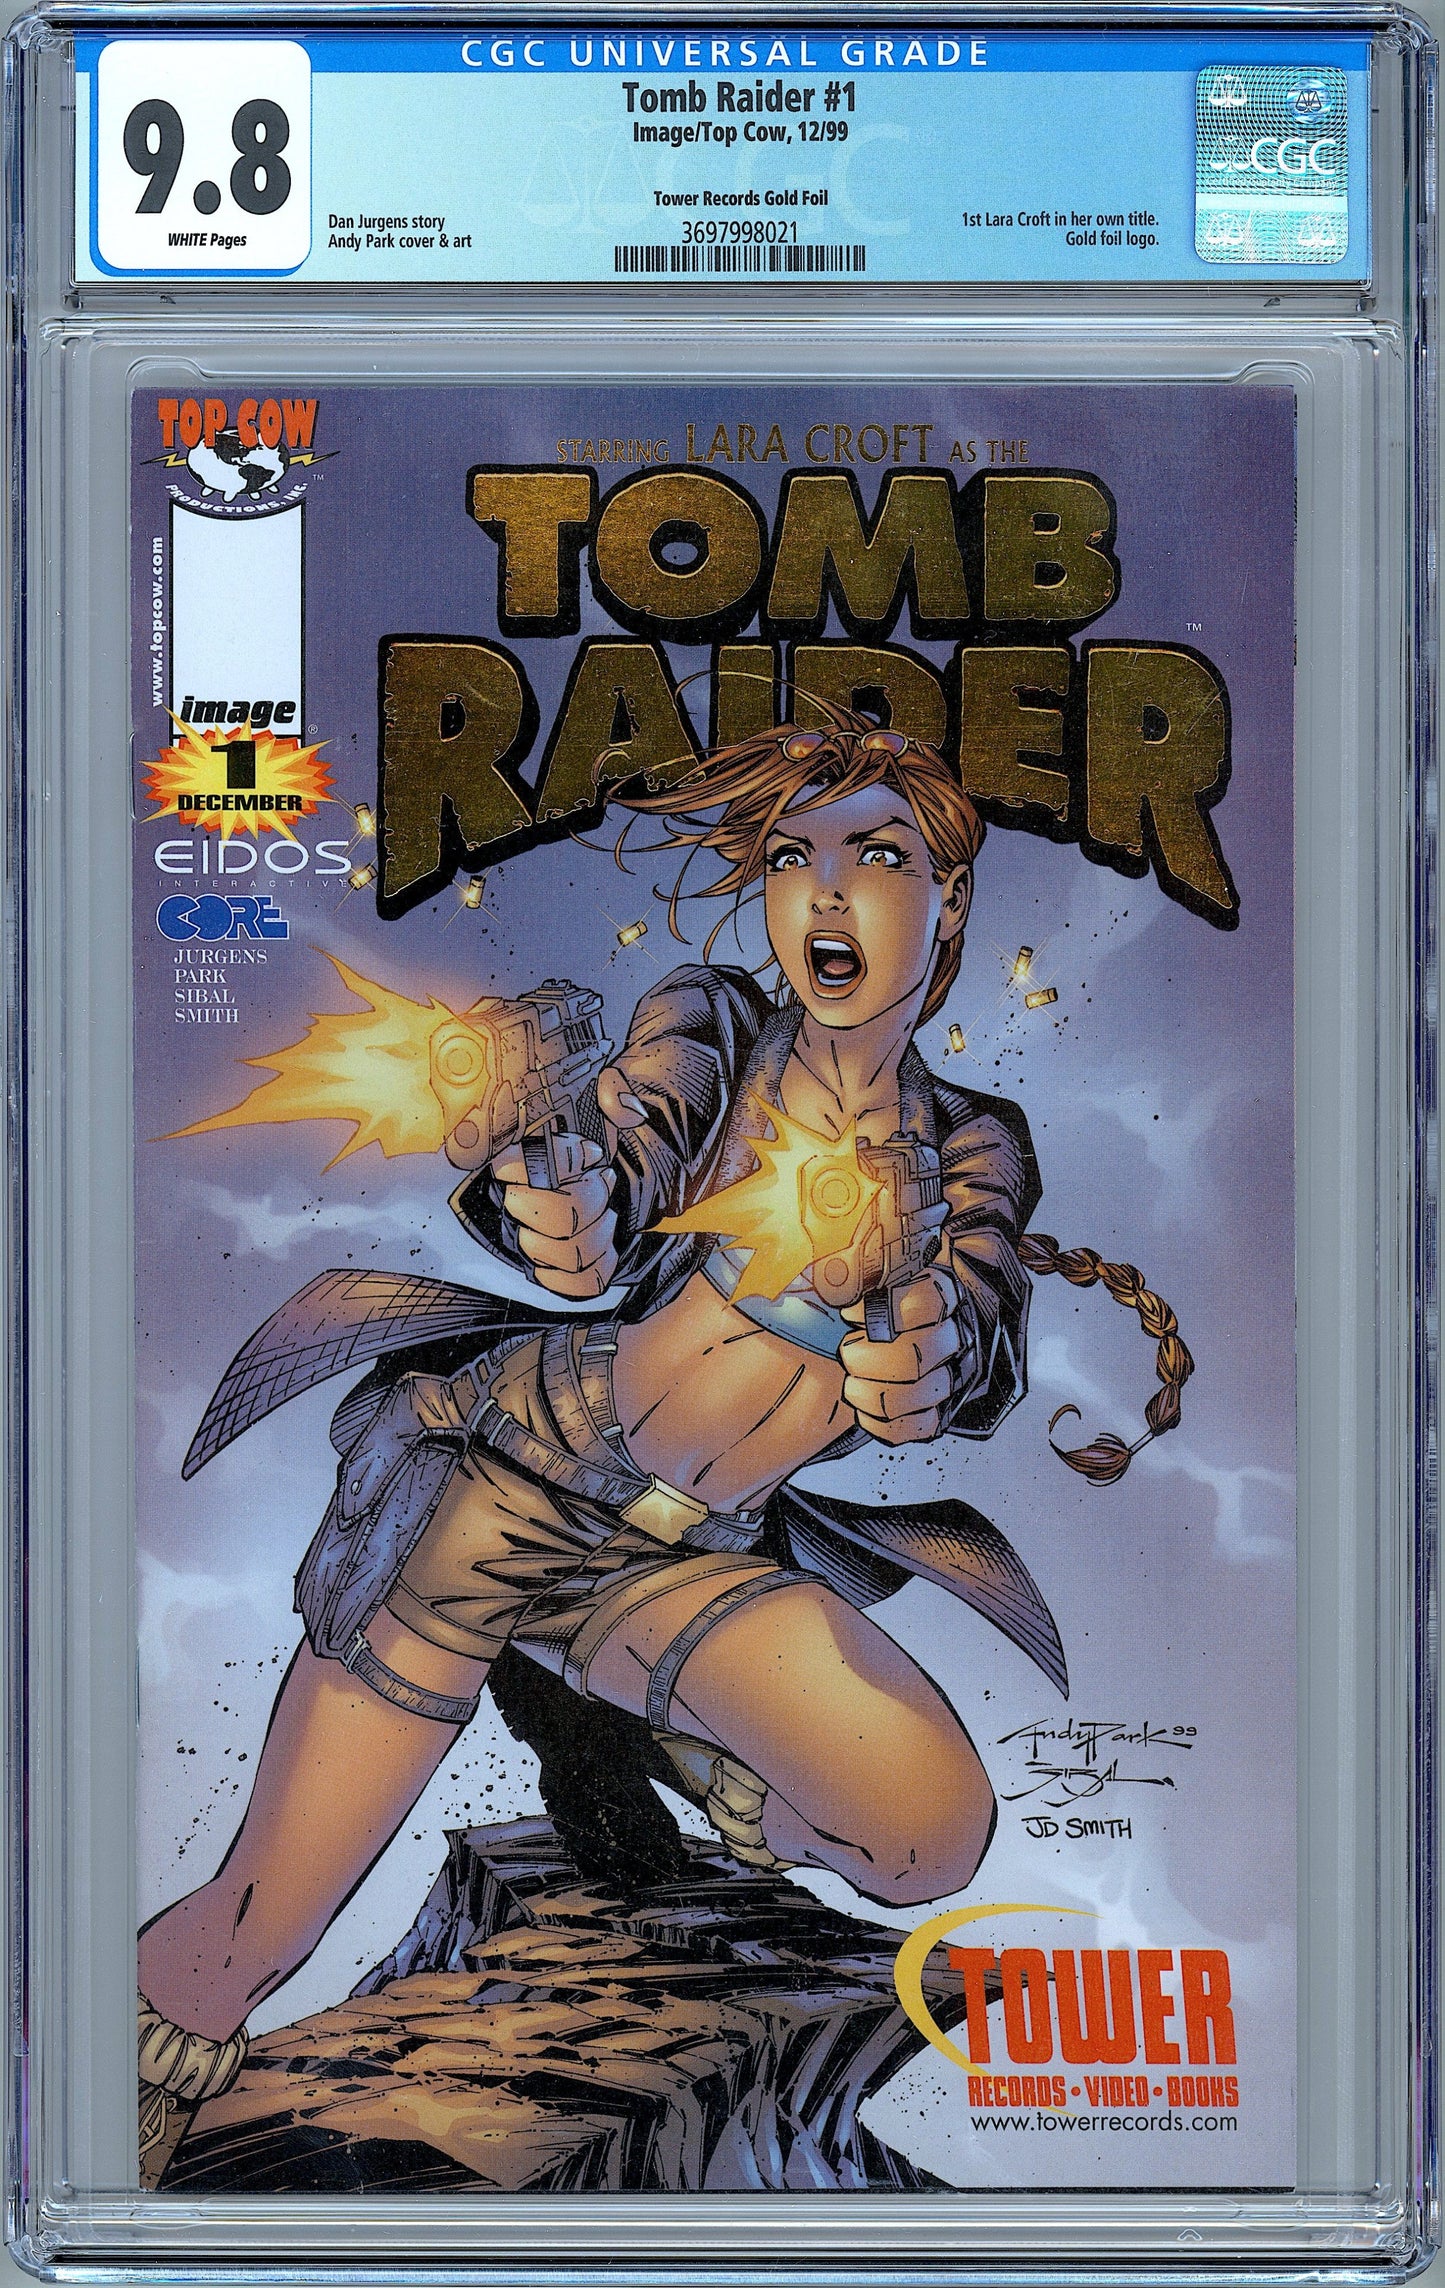 Tomb Raider #1 Tower Records Gold Foil Variant. CGC 9.8